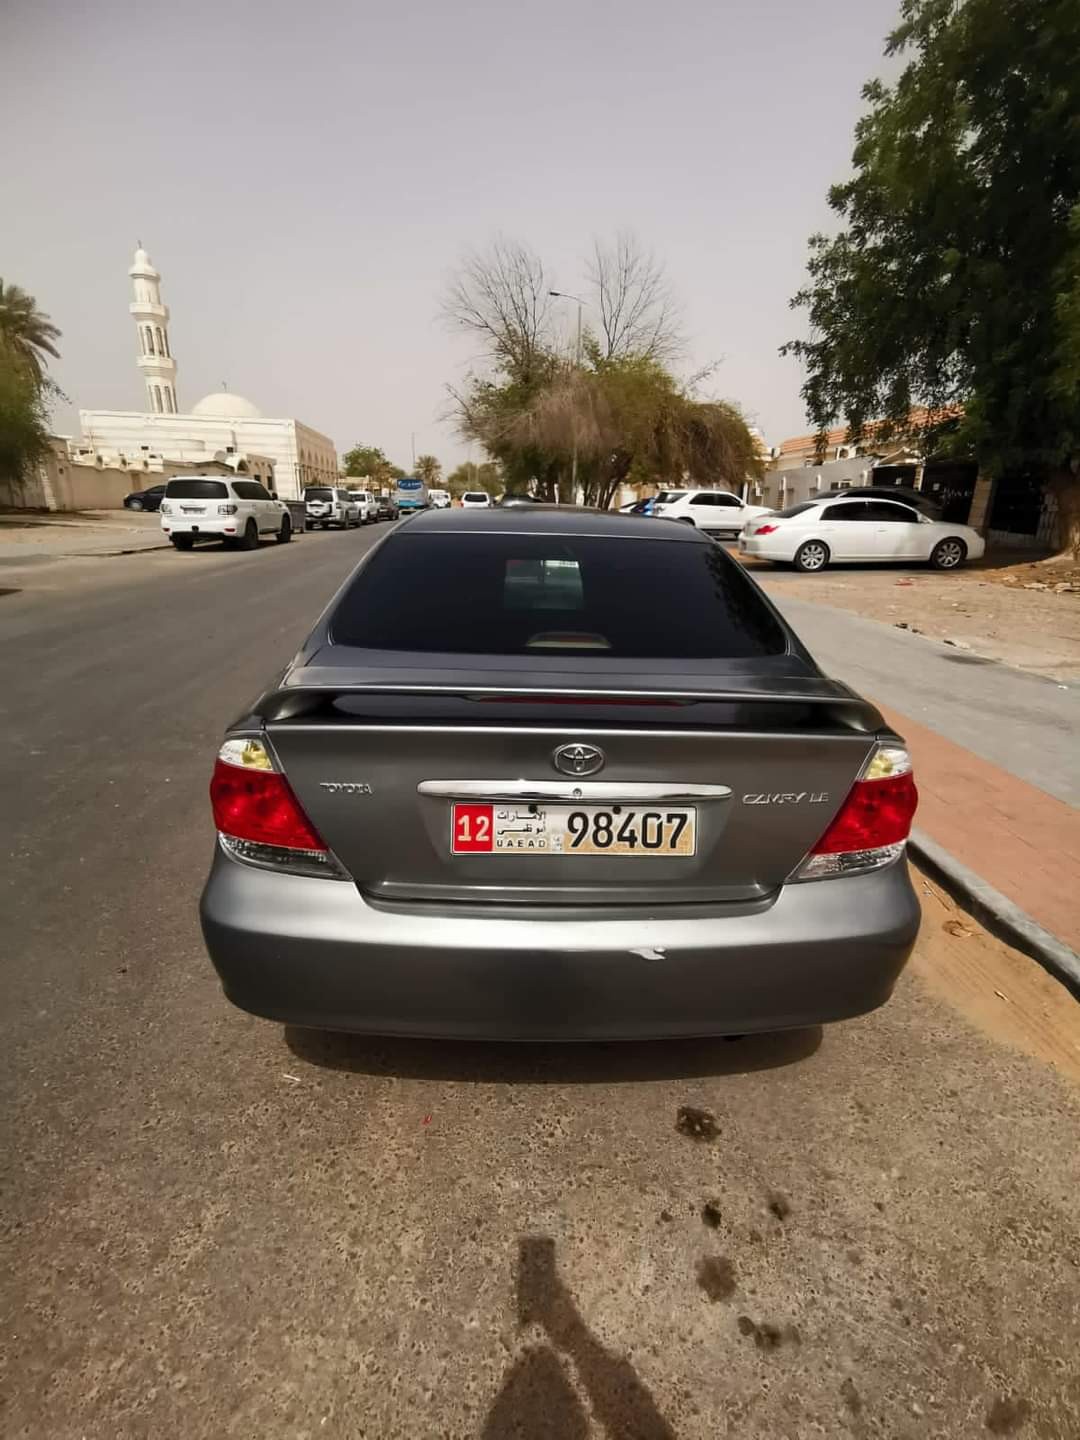 Toyota Camry 2005 - price 5,000 aed